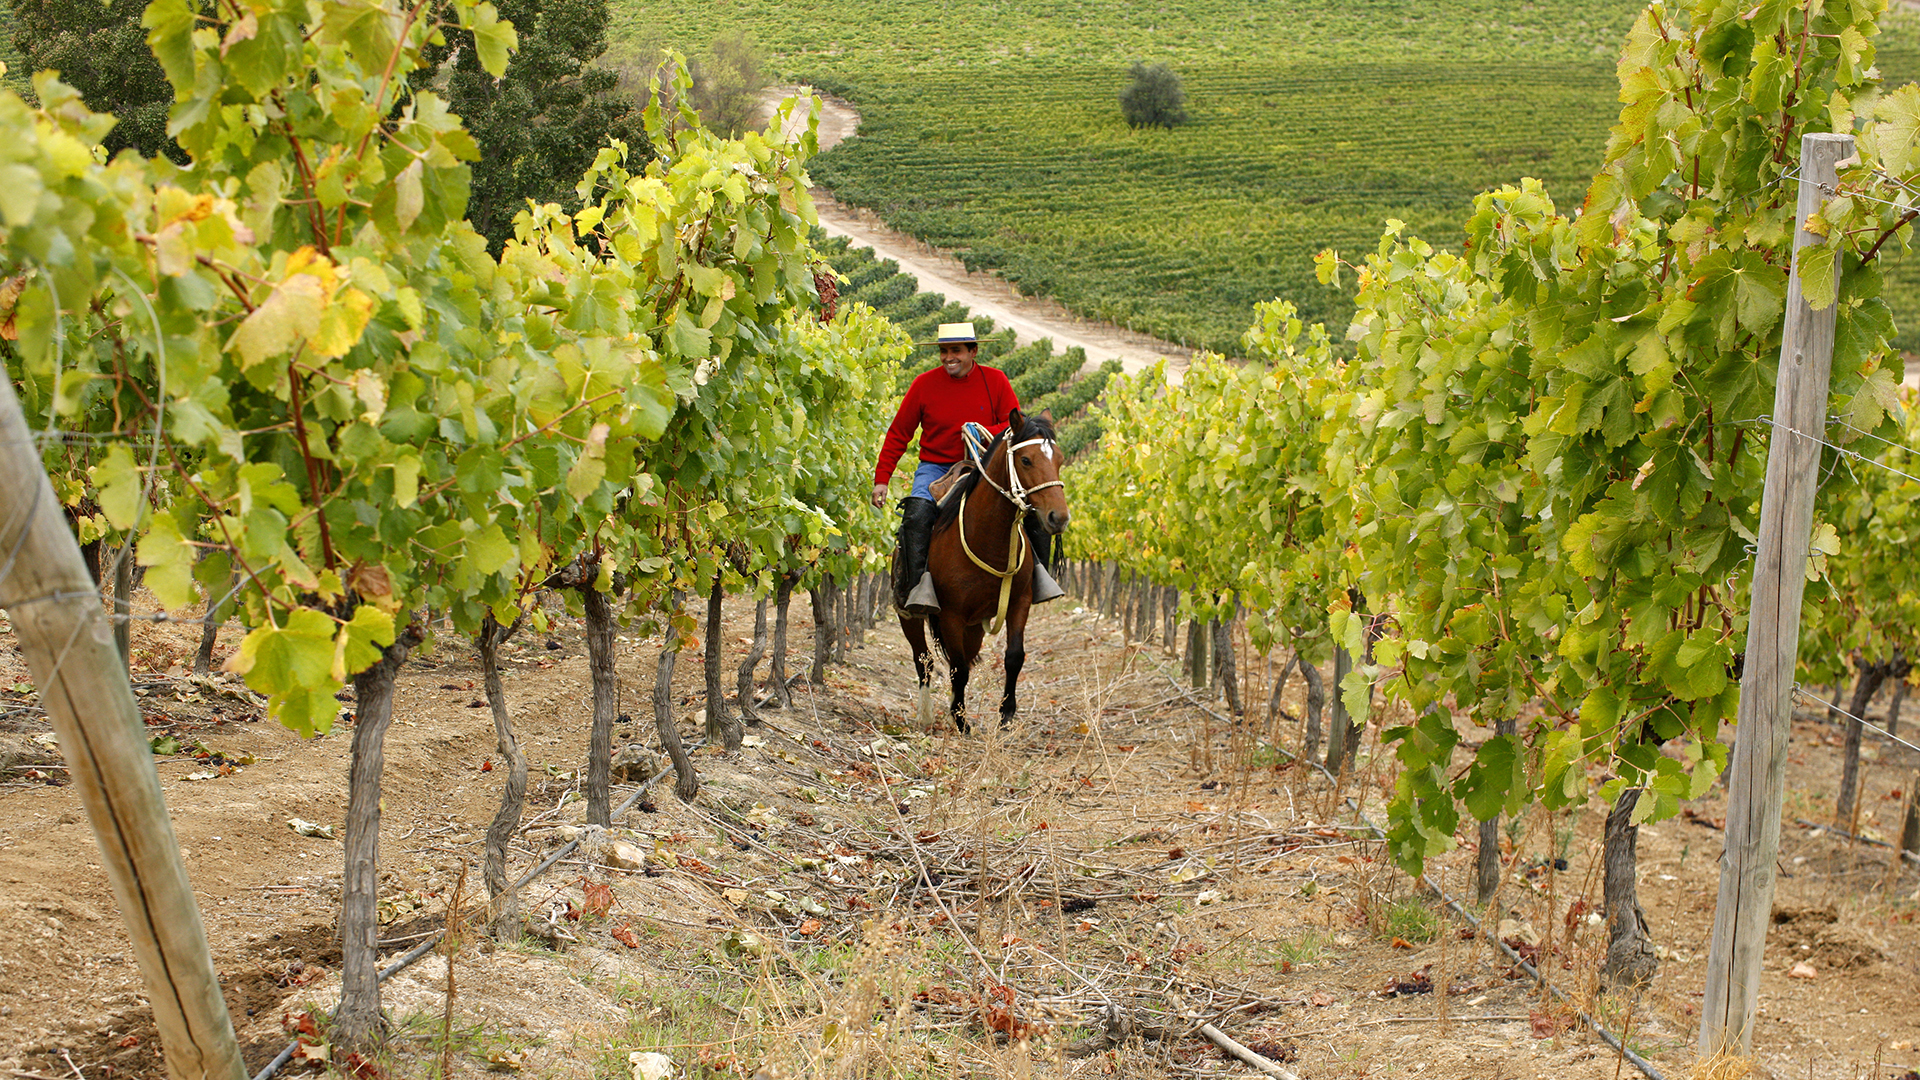 Magic in Chile: Taking a Wine Tour on Horseback